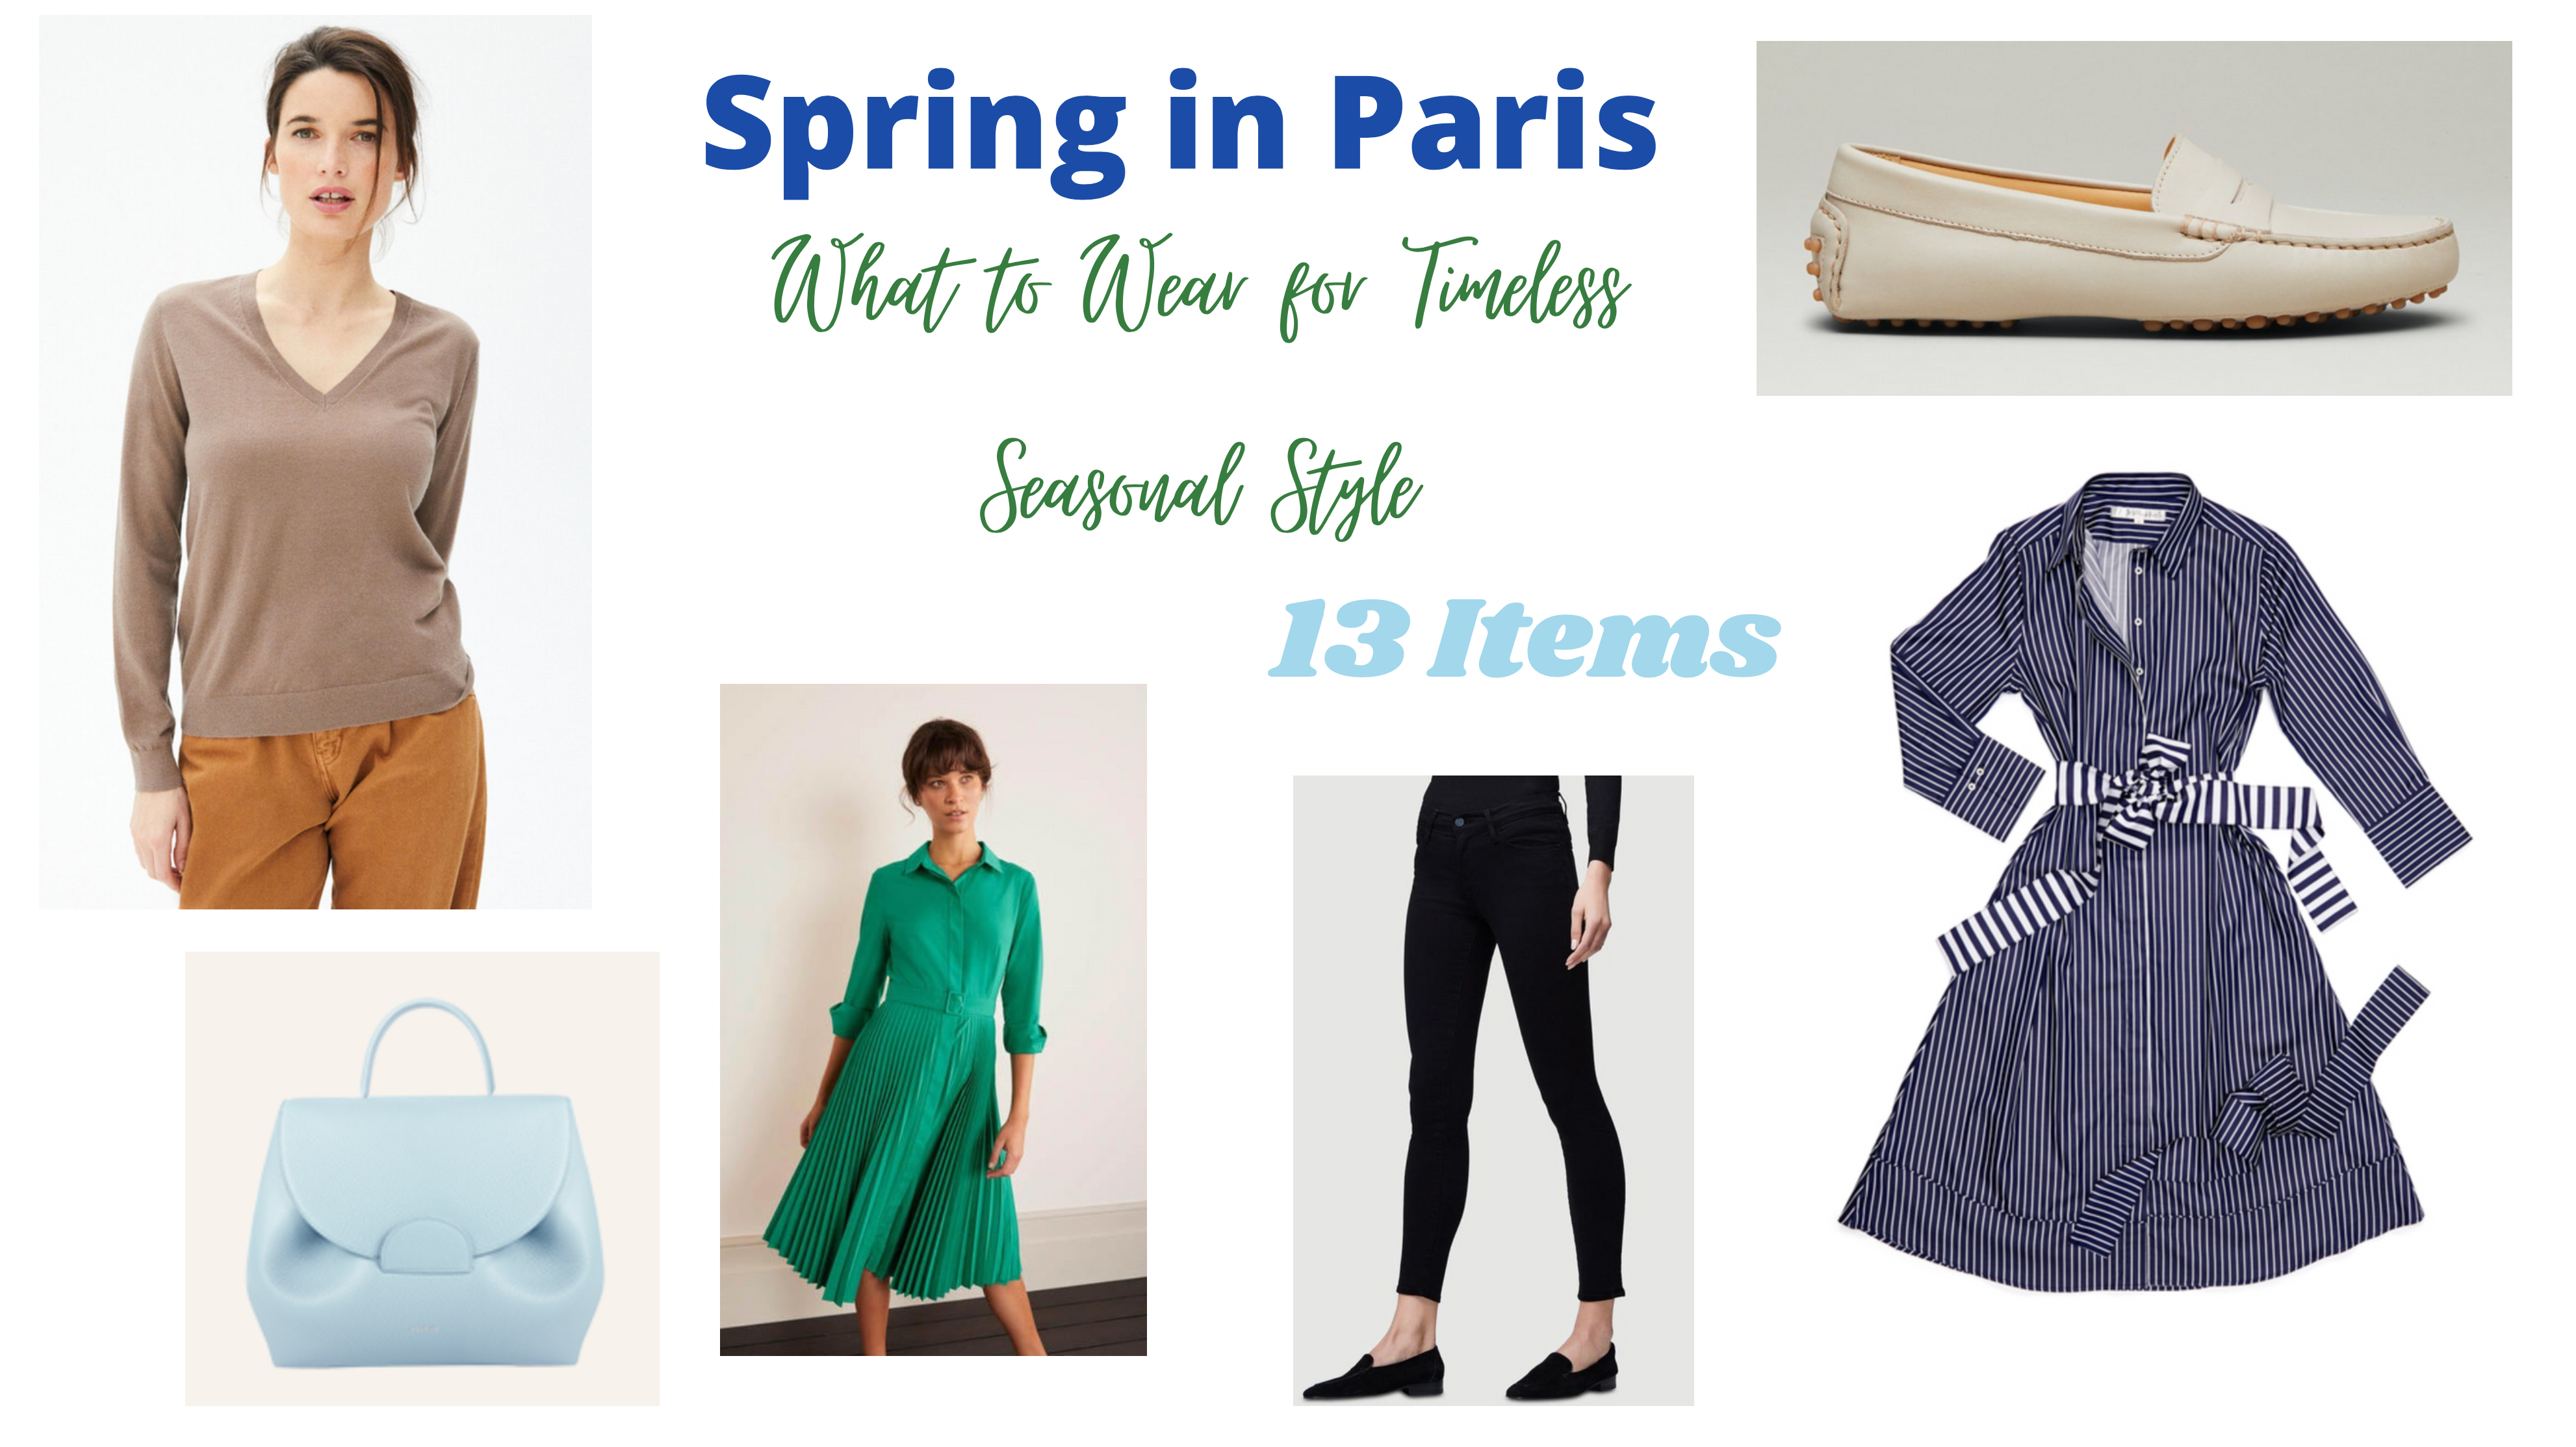 Spring in Paris — The 13 Essentials for Timeless Seasonal Style